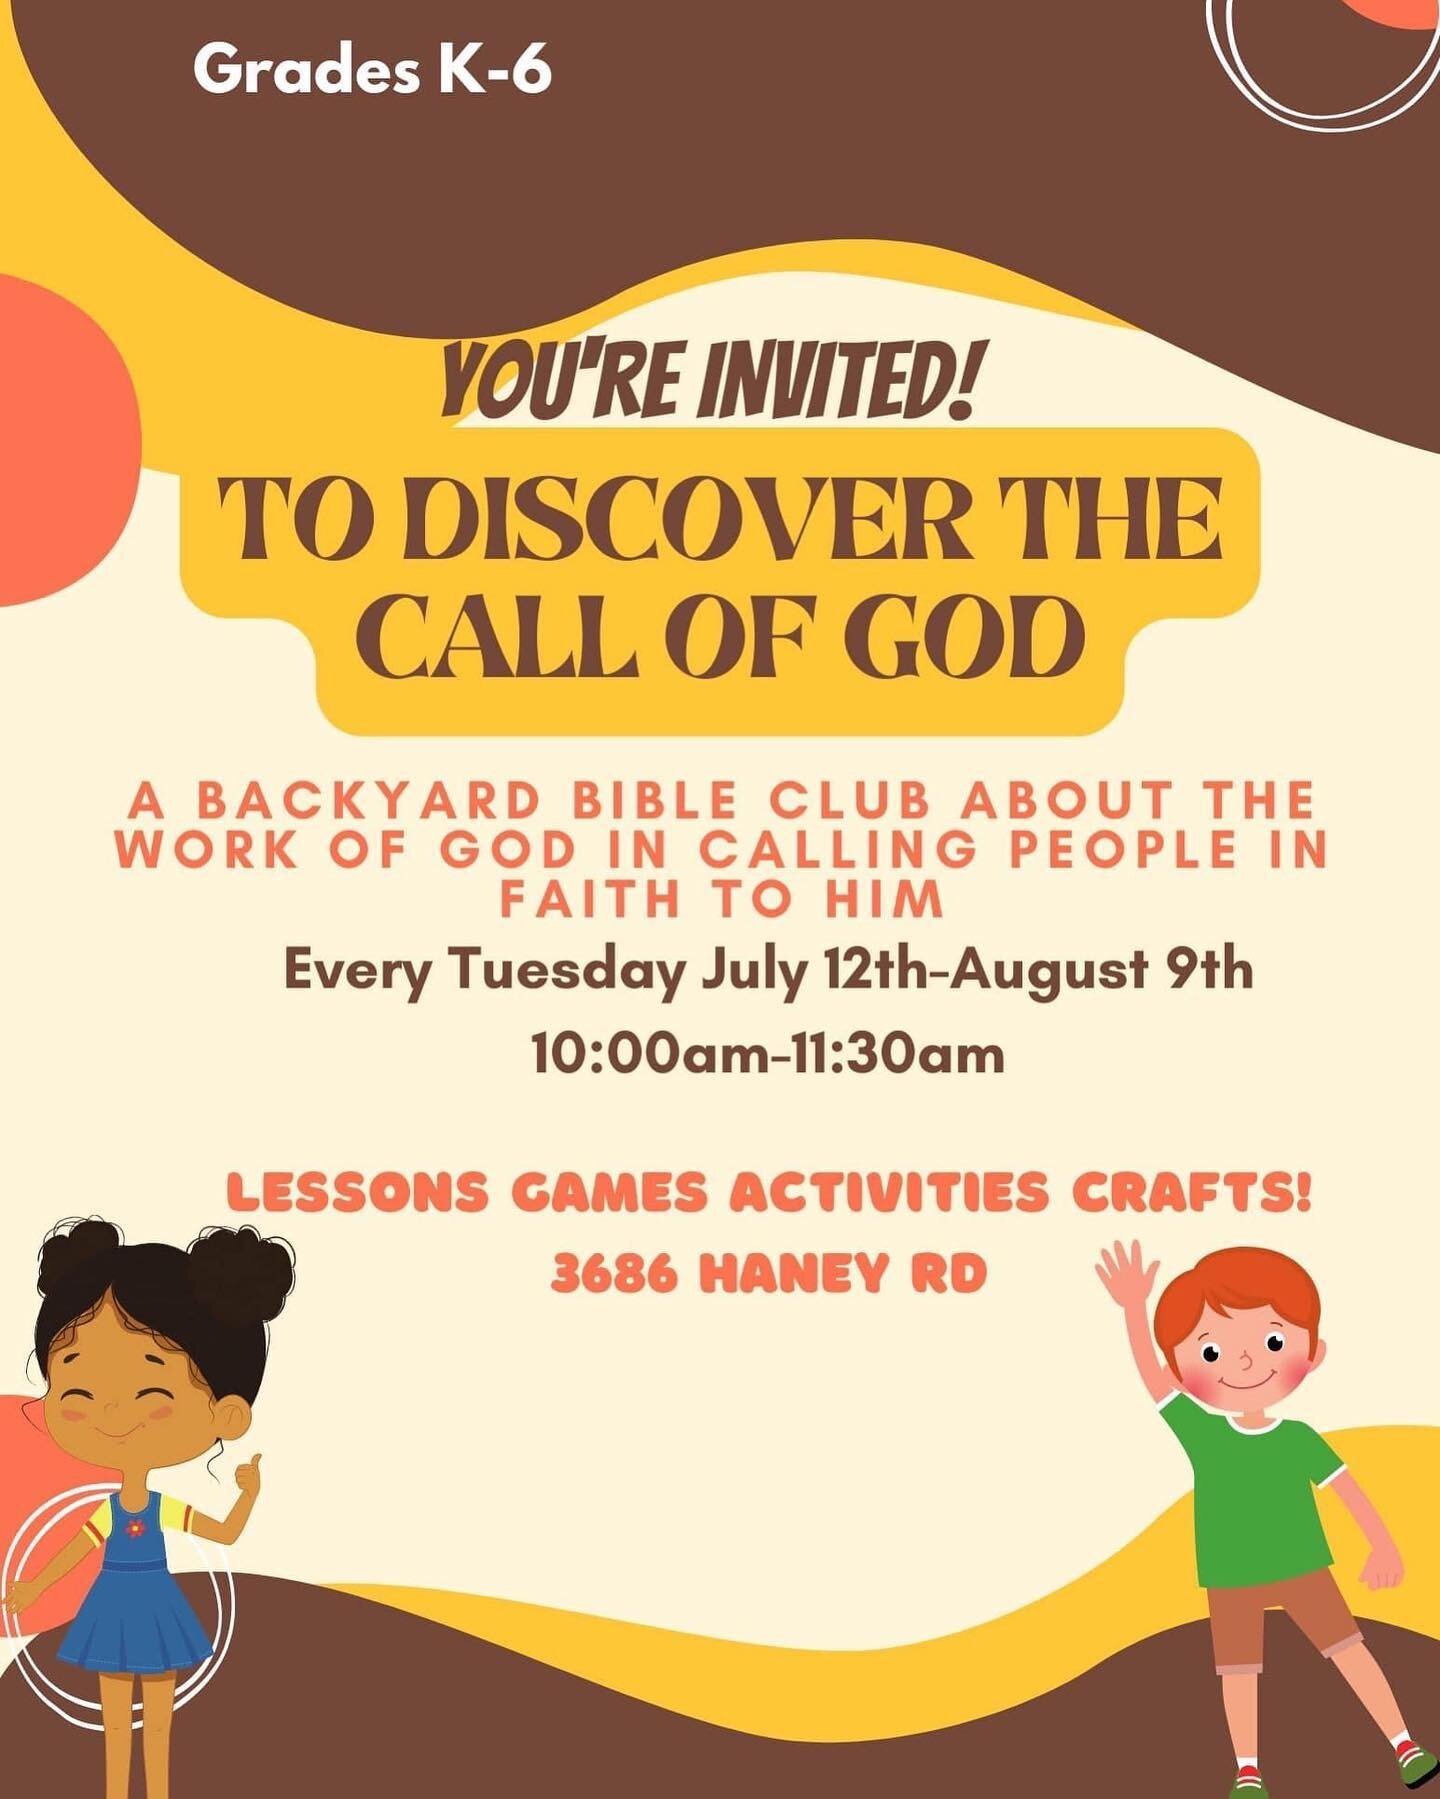 You&rsquo;re invited to discover the call of God! Join us starting July 12, for a fun and interactive Bible learning experience at One Family Church! Bring children kindergarten through 6th grade for Backyard Bible Club!